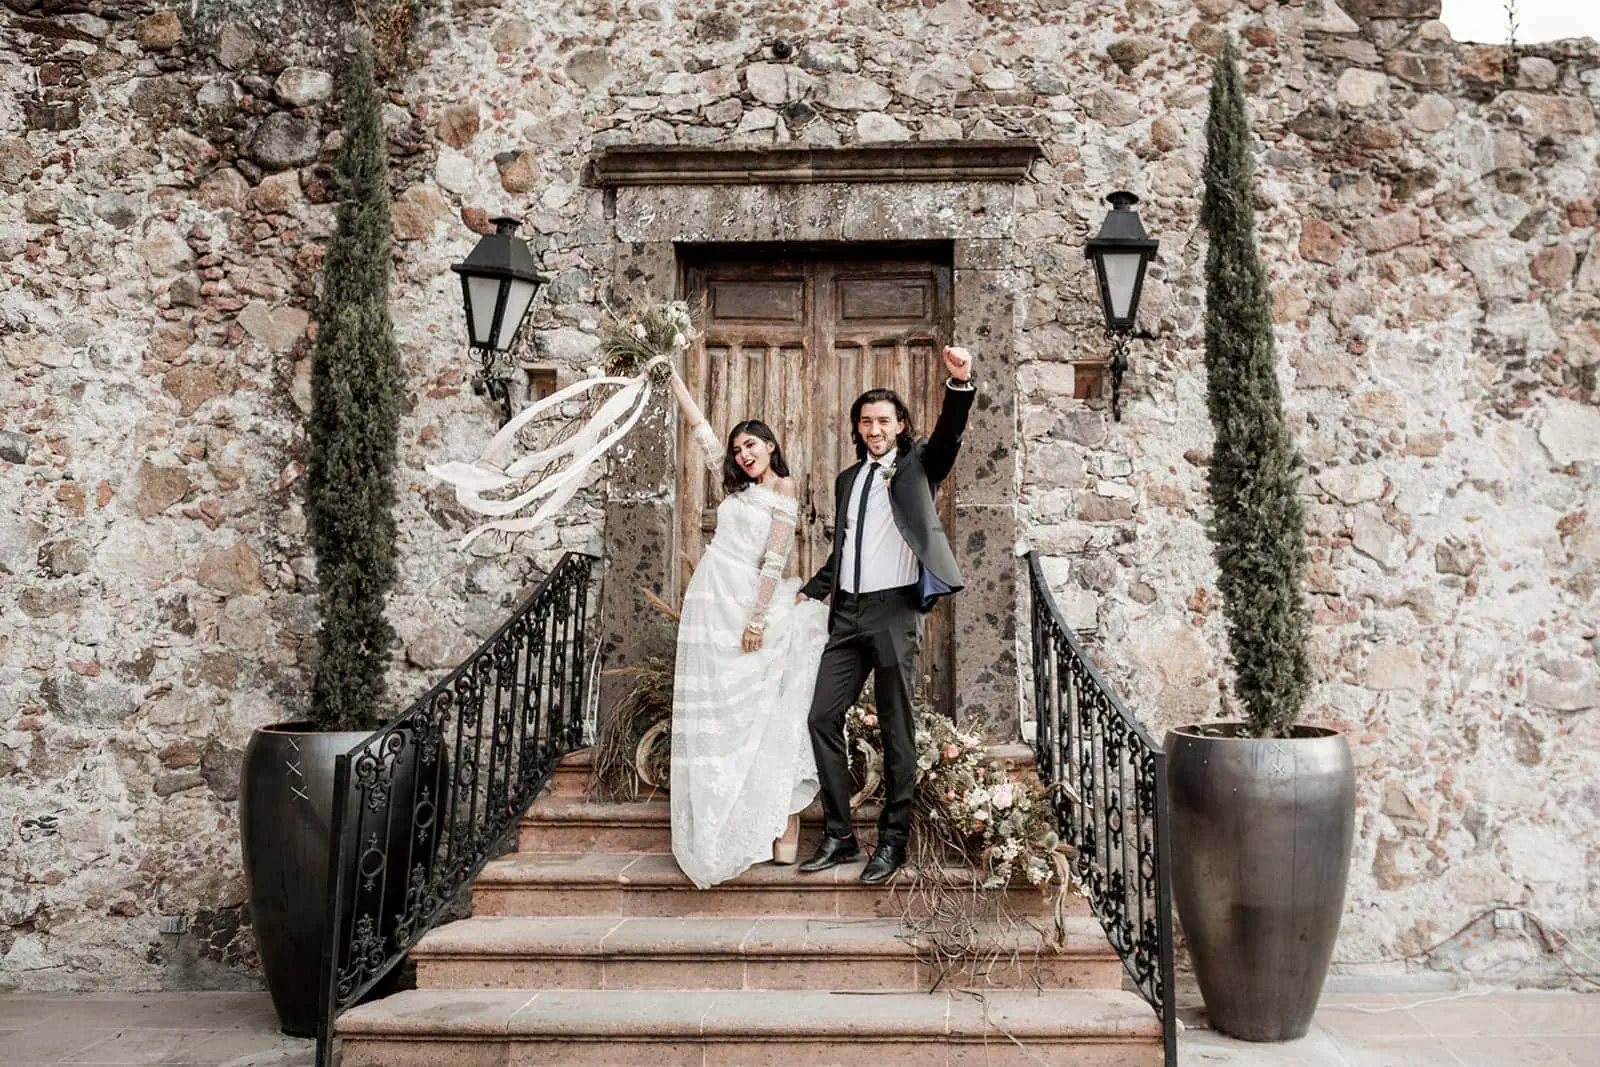 Bride and groom just married at traditional Mexico venue